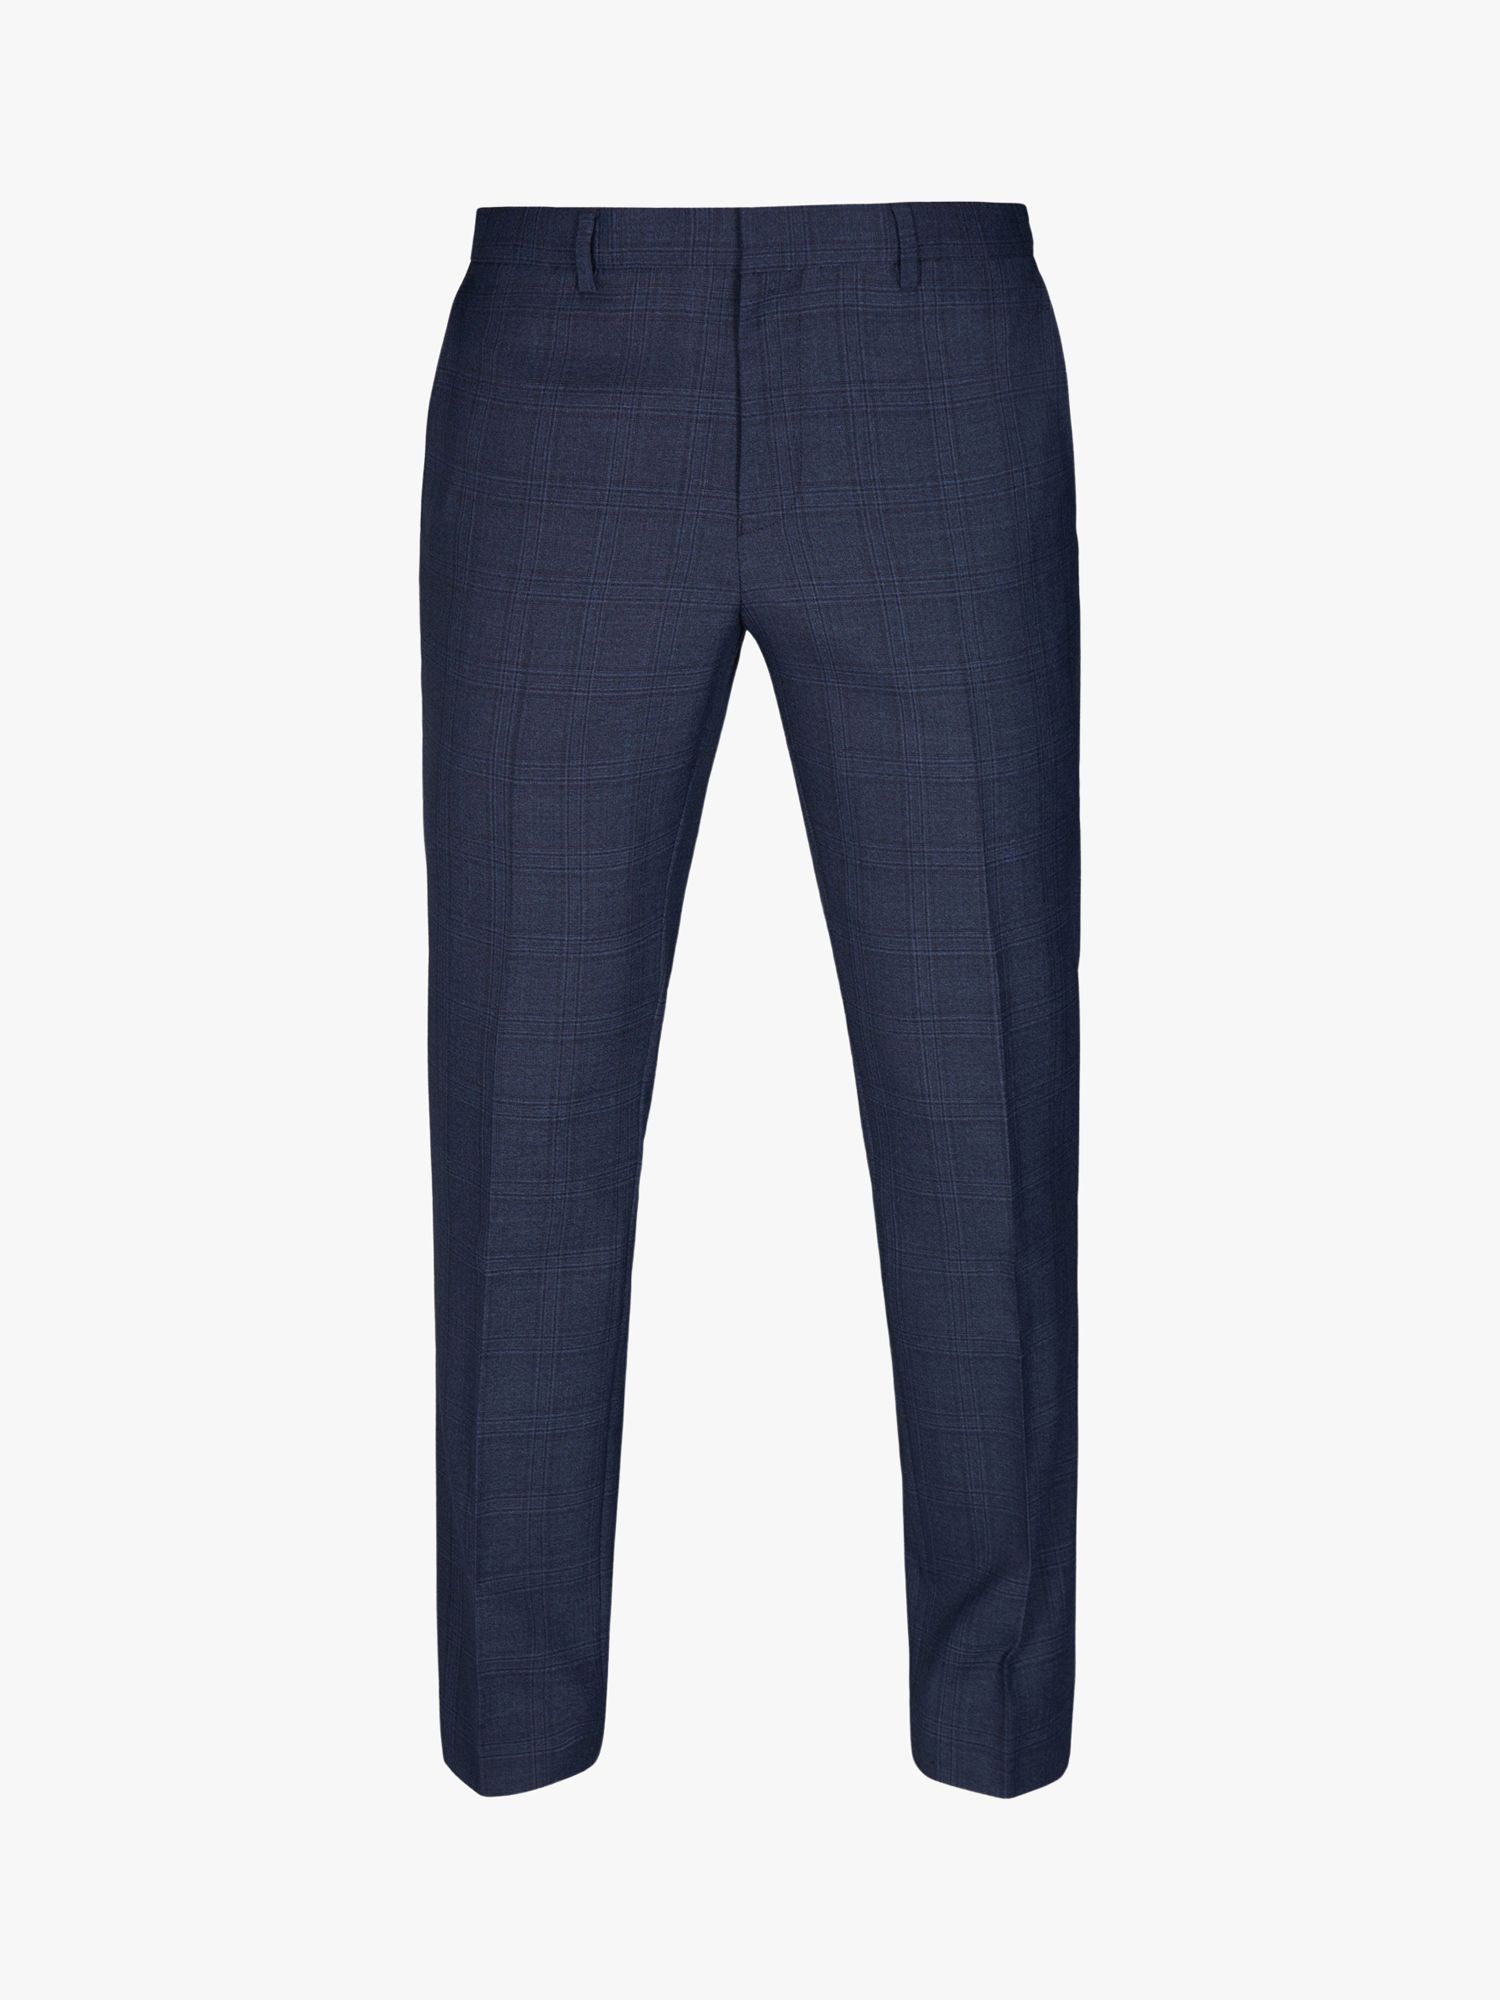 Buy Ted Baker Ara Textured Check Wool Blend Suit Trousers, Navy Online at johnlewis.com